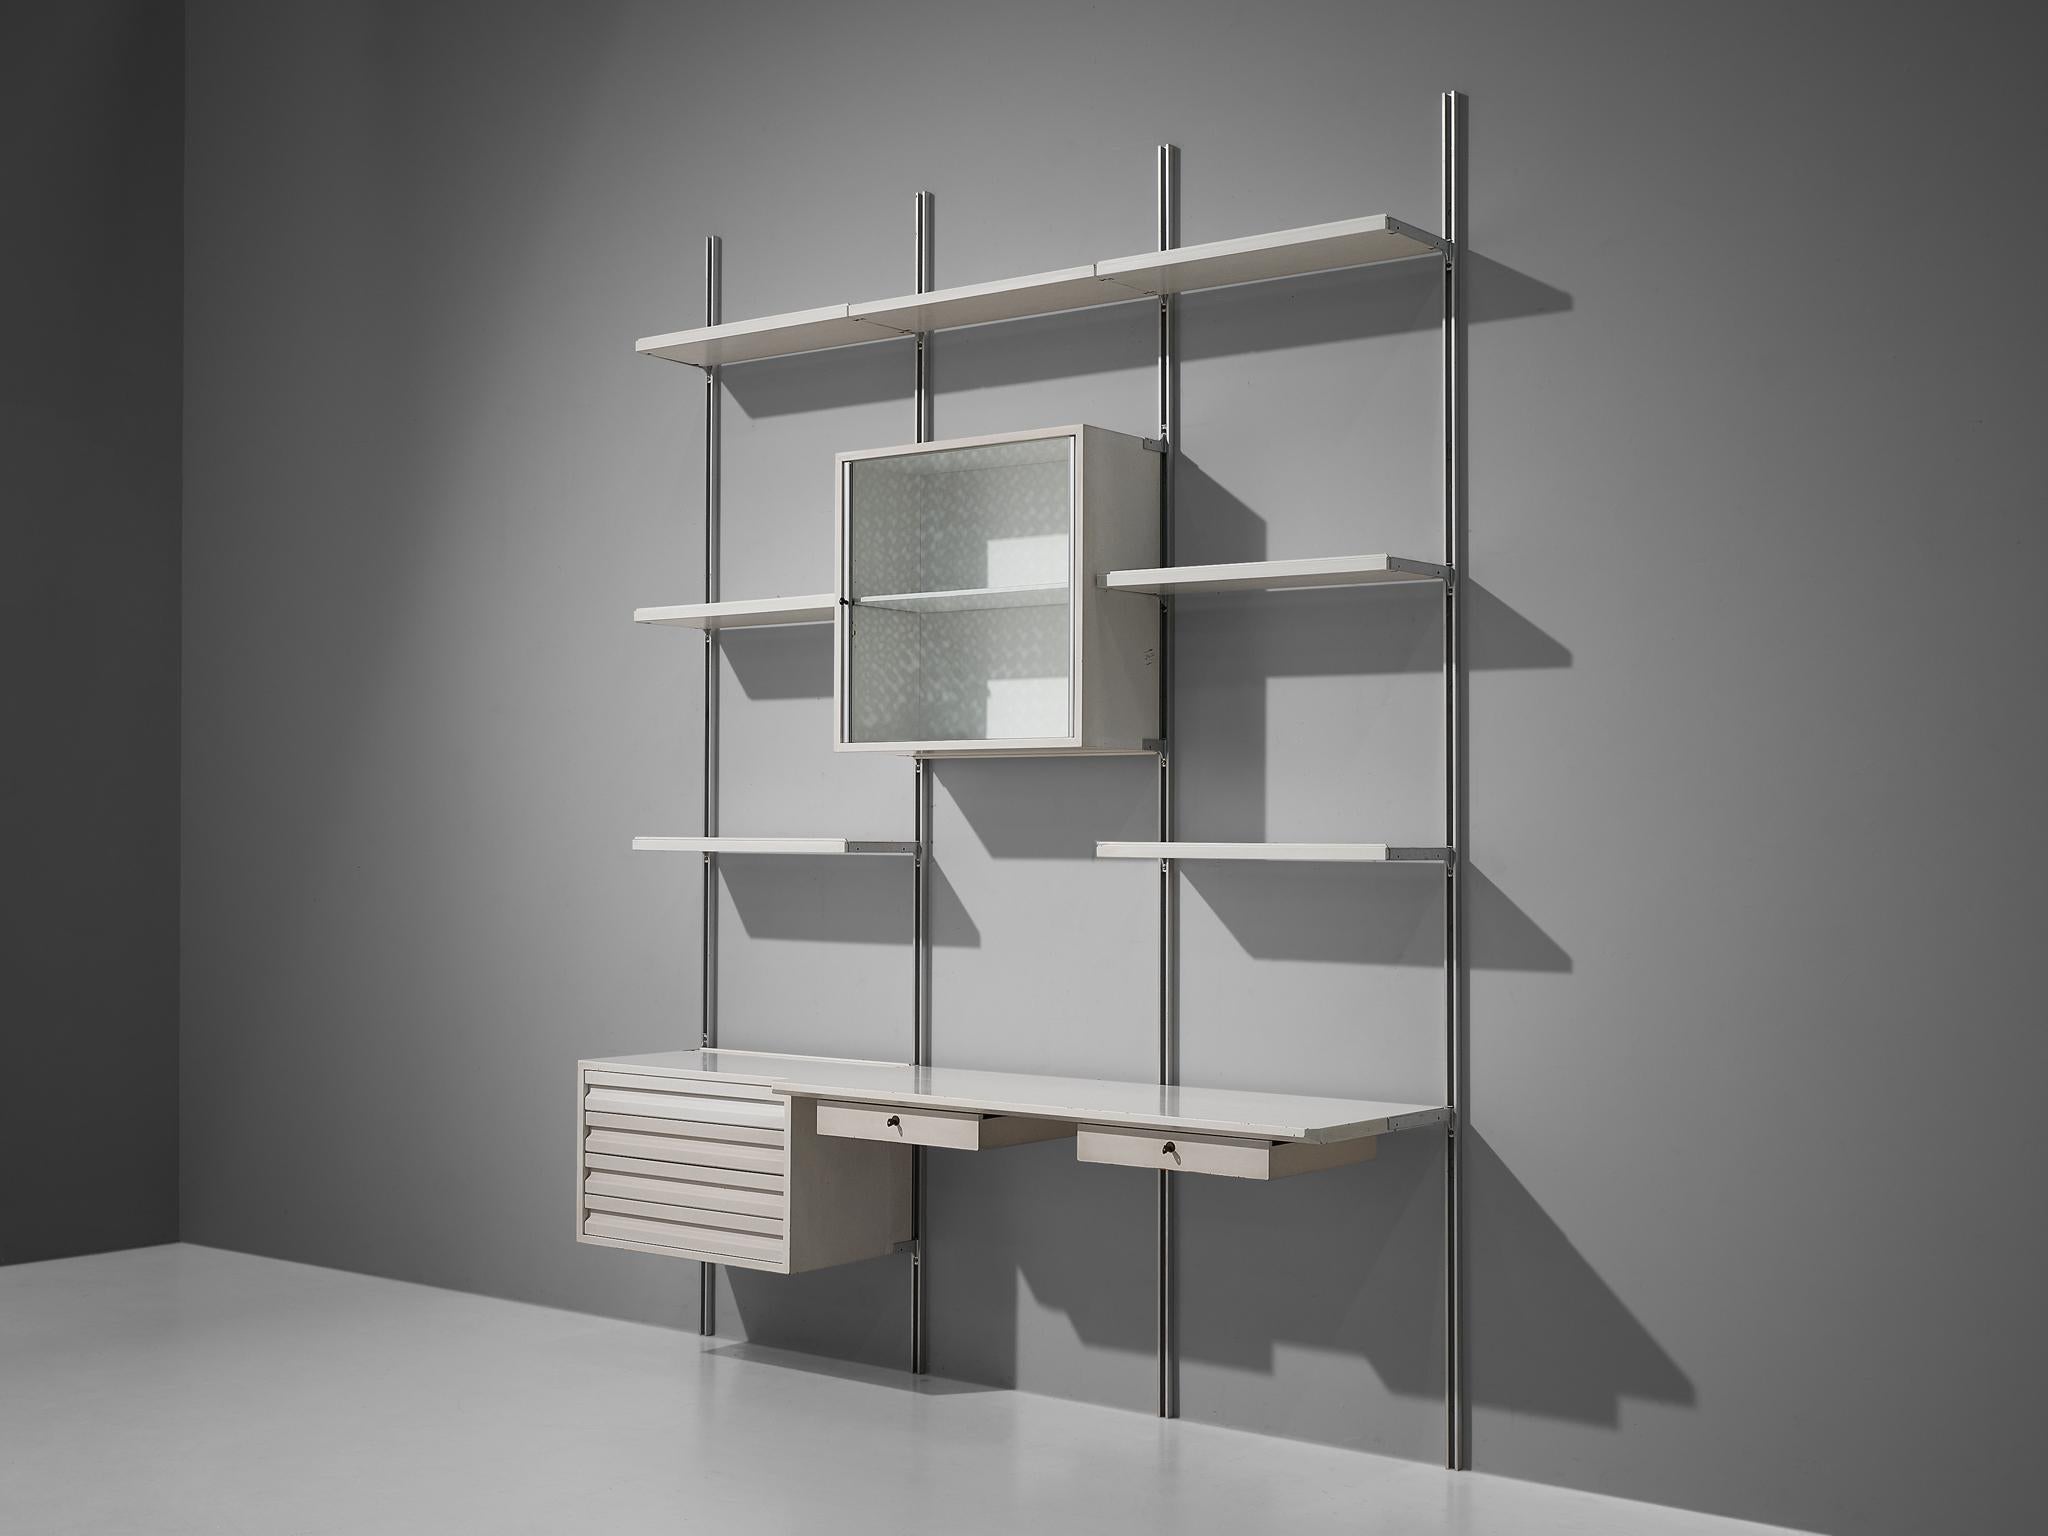 Osvaldo Borsani for Tecno, bookcase or wall unit, metal, Italy, 1950s.

This wall-mounted shelving unit is three sections large. The order and lay out of this unit is adjustable and can be placed according to your own taste or style. According to